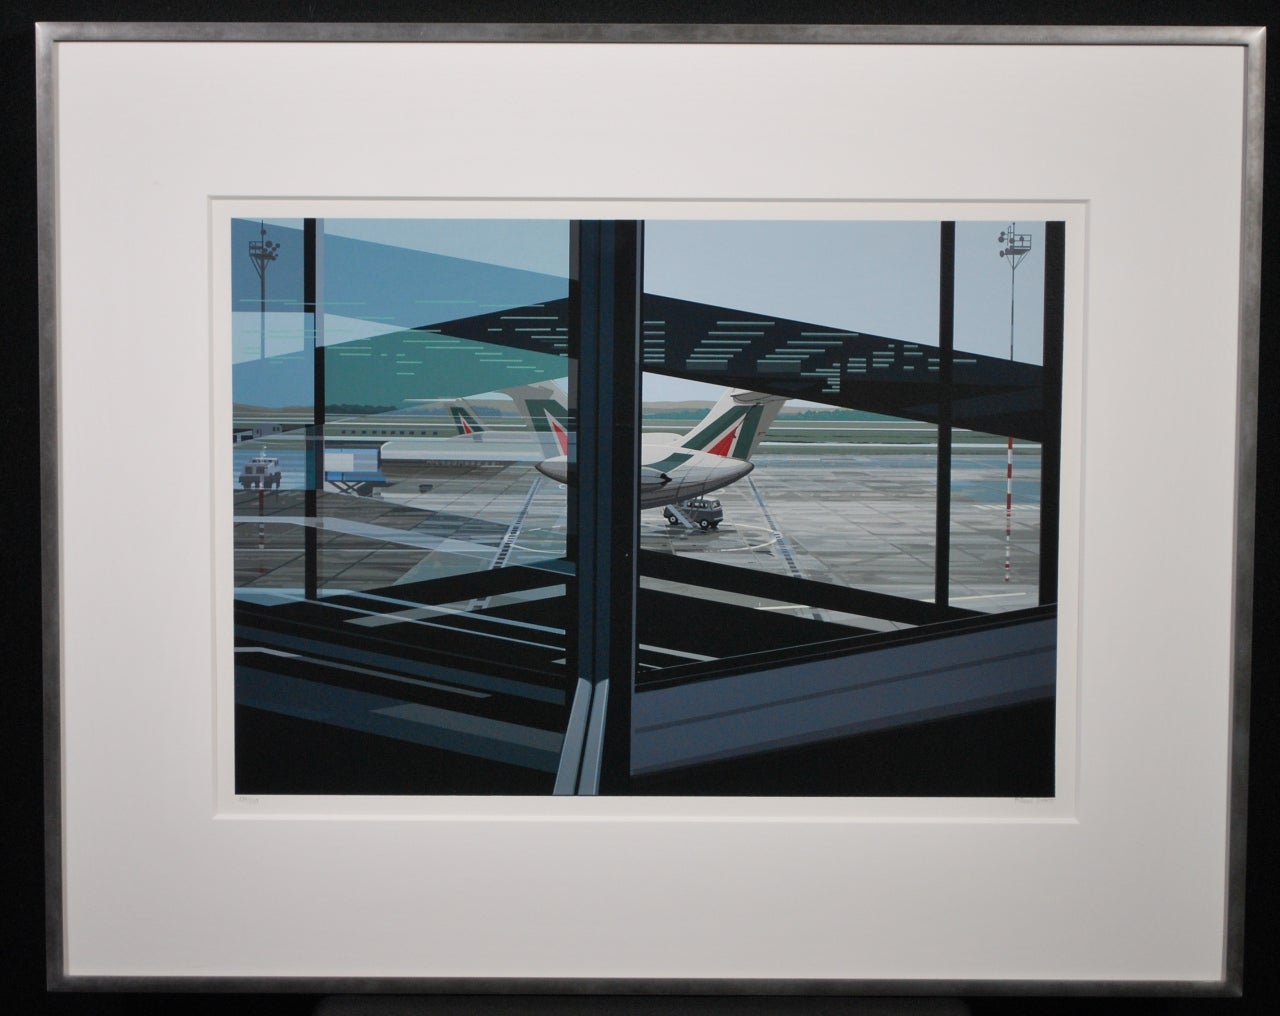 Born in 1932 in Illinois, Richard Estes is regarded as one of the founders of the Photorealist movement which emerged in the 1960s. Estes' minutely-detailed urban landscapes can be found in the following public collections:

• Museum Ludwig,